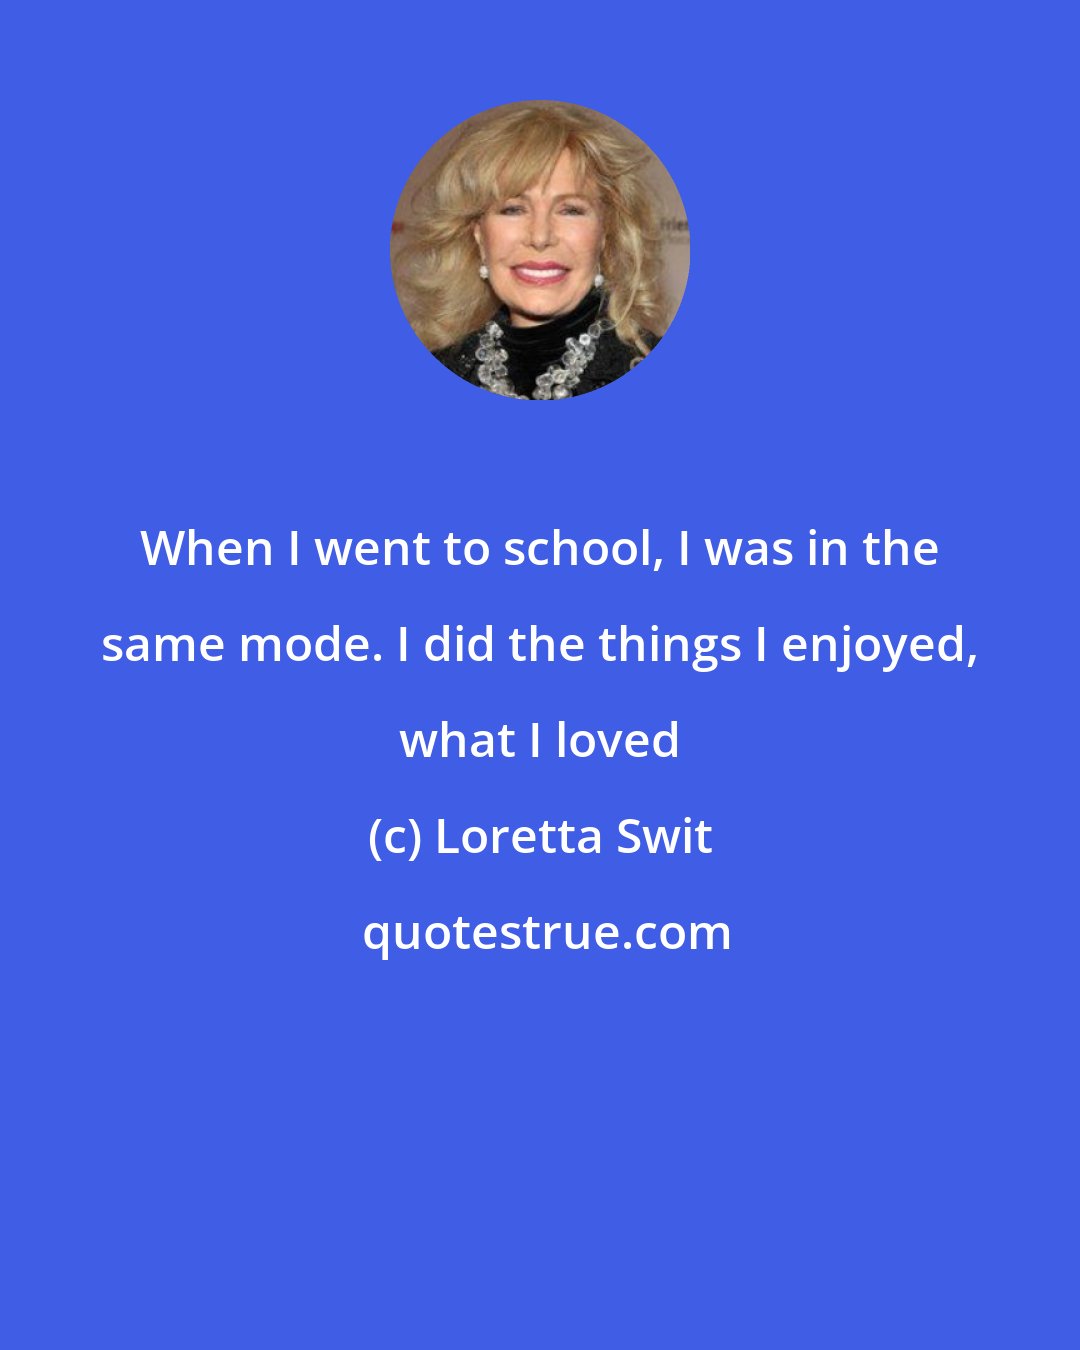 Loretta Swit: When I went to school, I was in the same mode. I did the things I enjoyed, what I loved